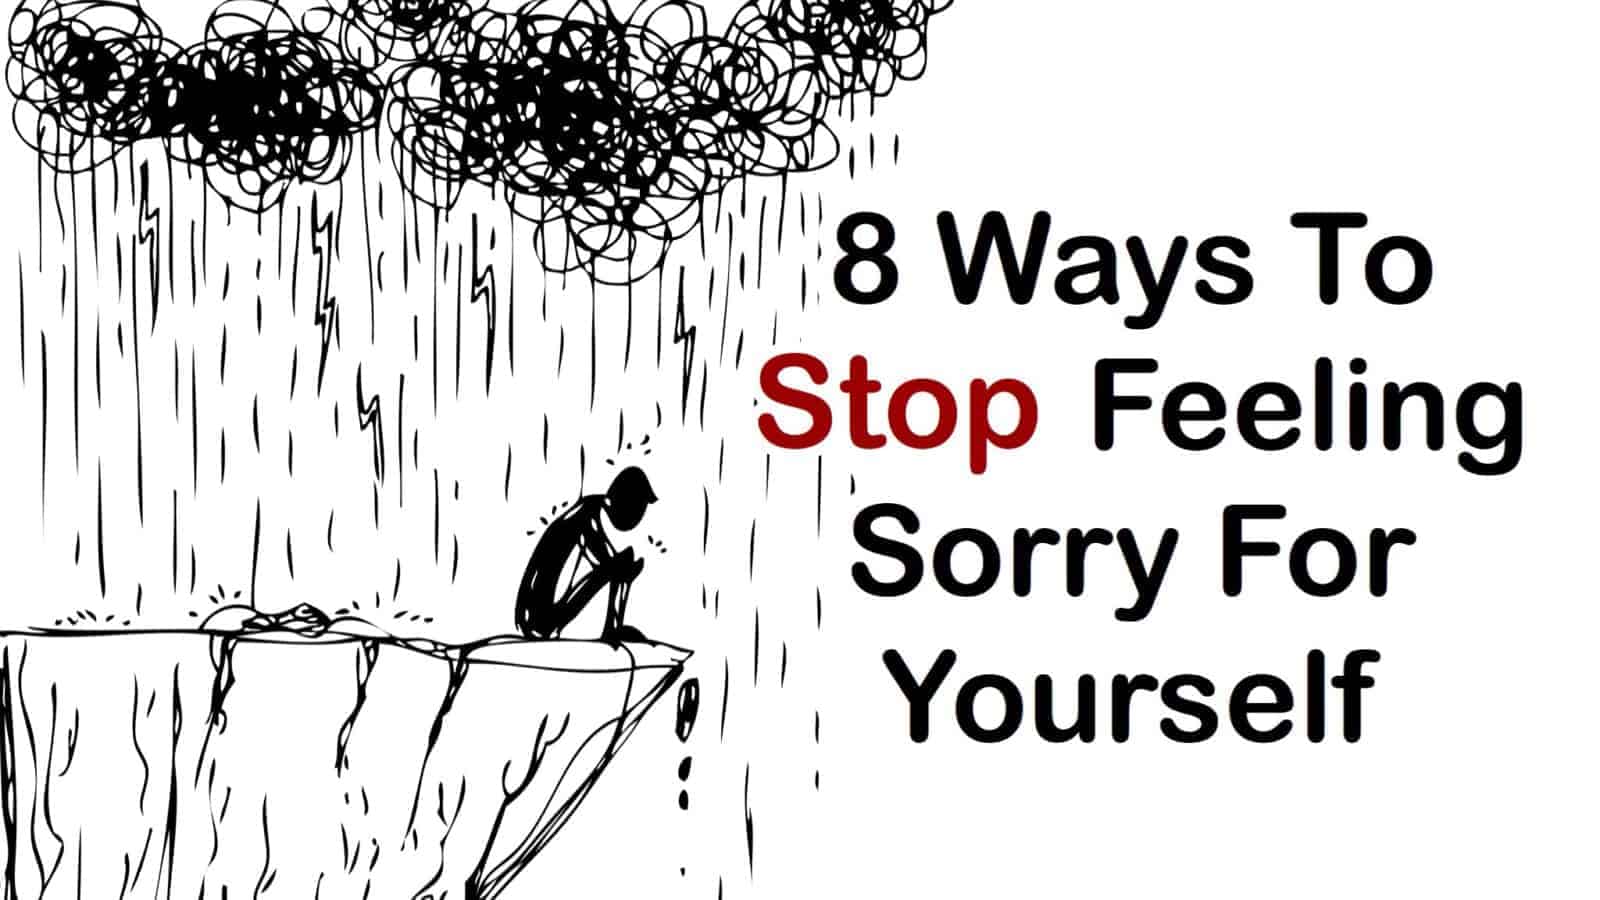 8 Ways To Stop Feeling Sorry For Yourself